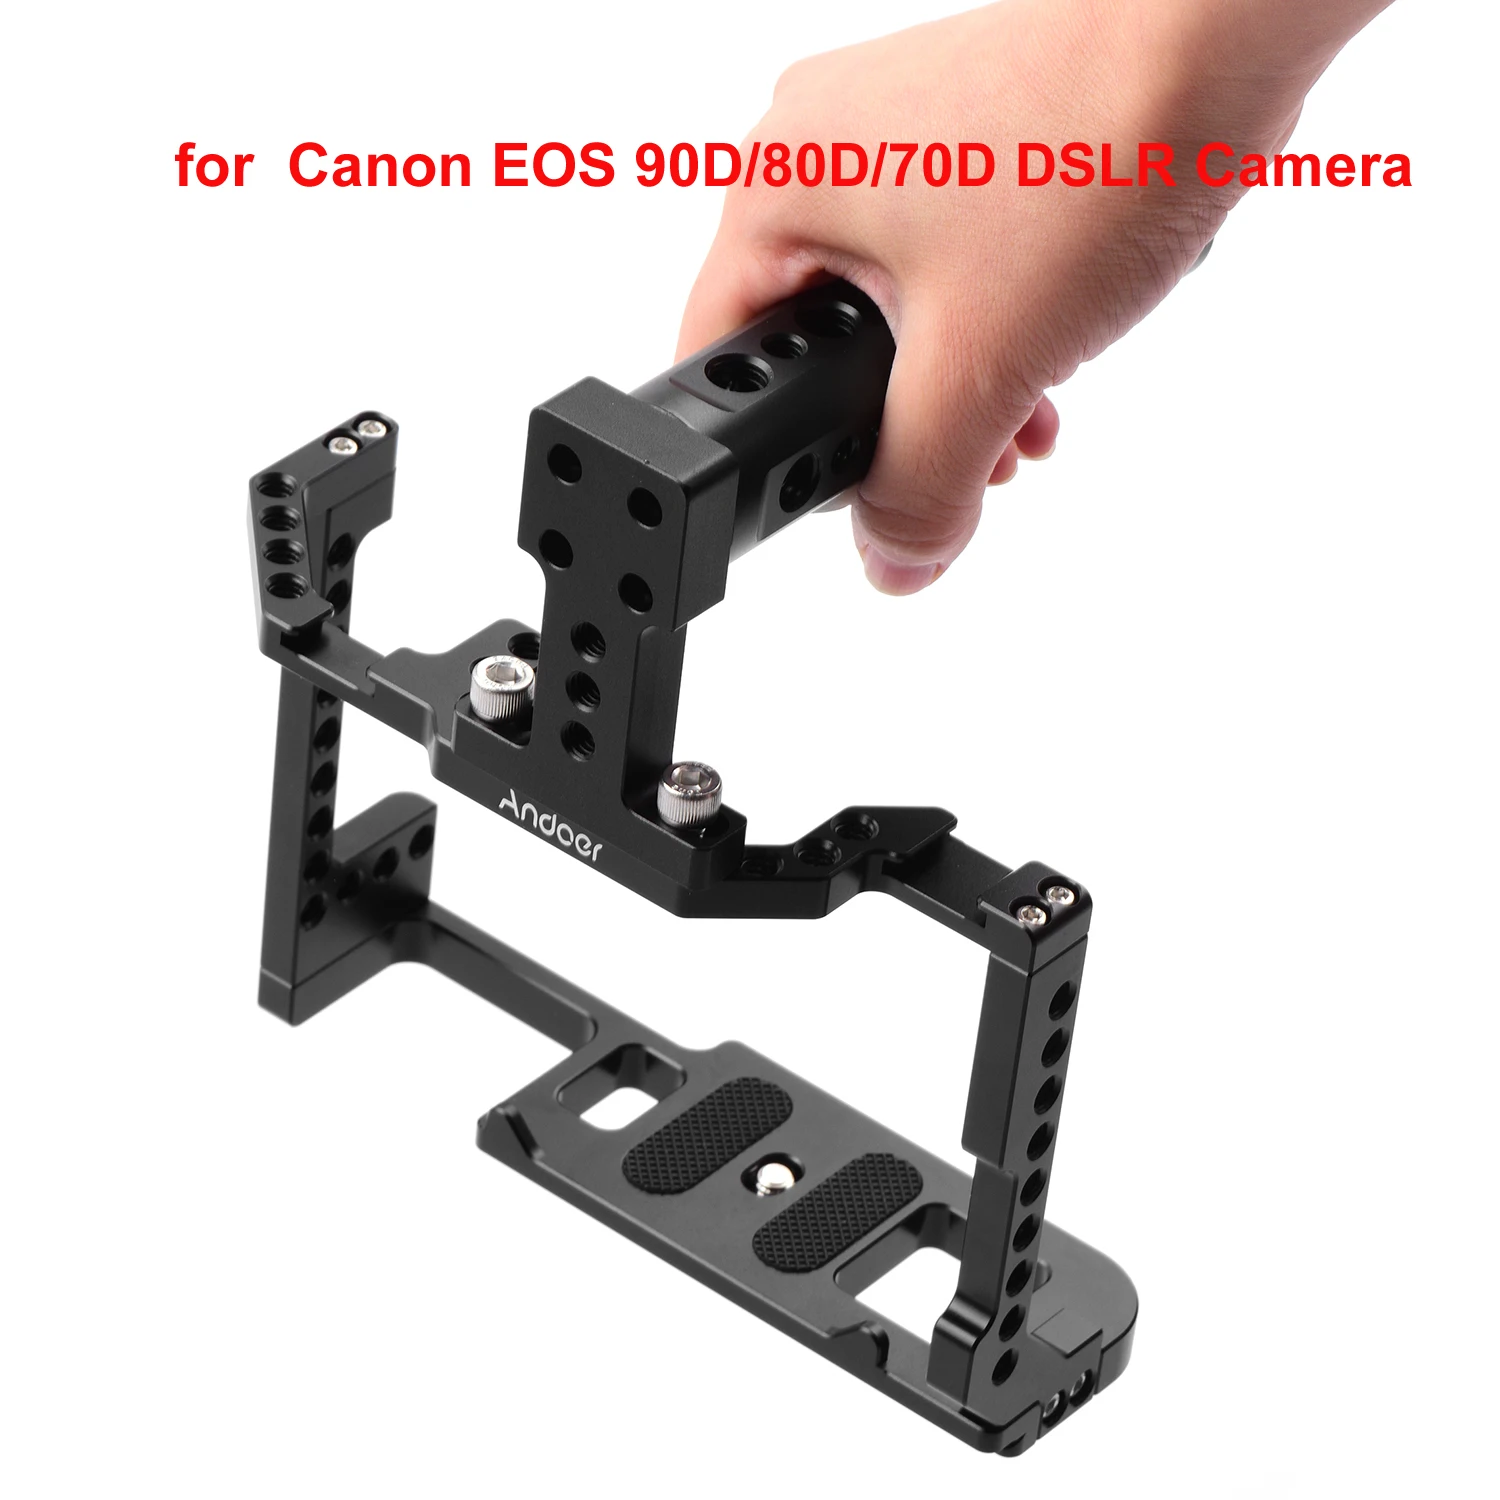 Top handle kit aluminum Alloy for Canon EOS DSLR Camera r0o9 Andoer Camera Cage 